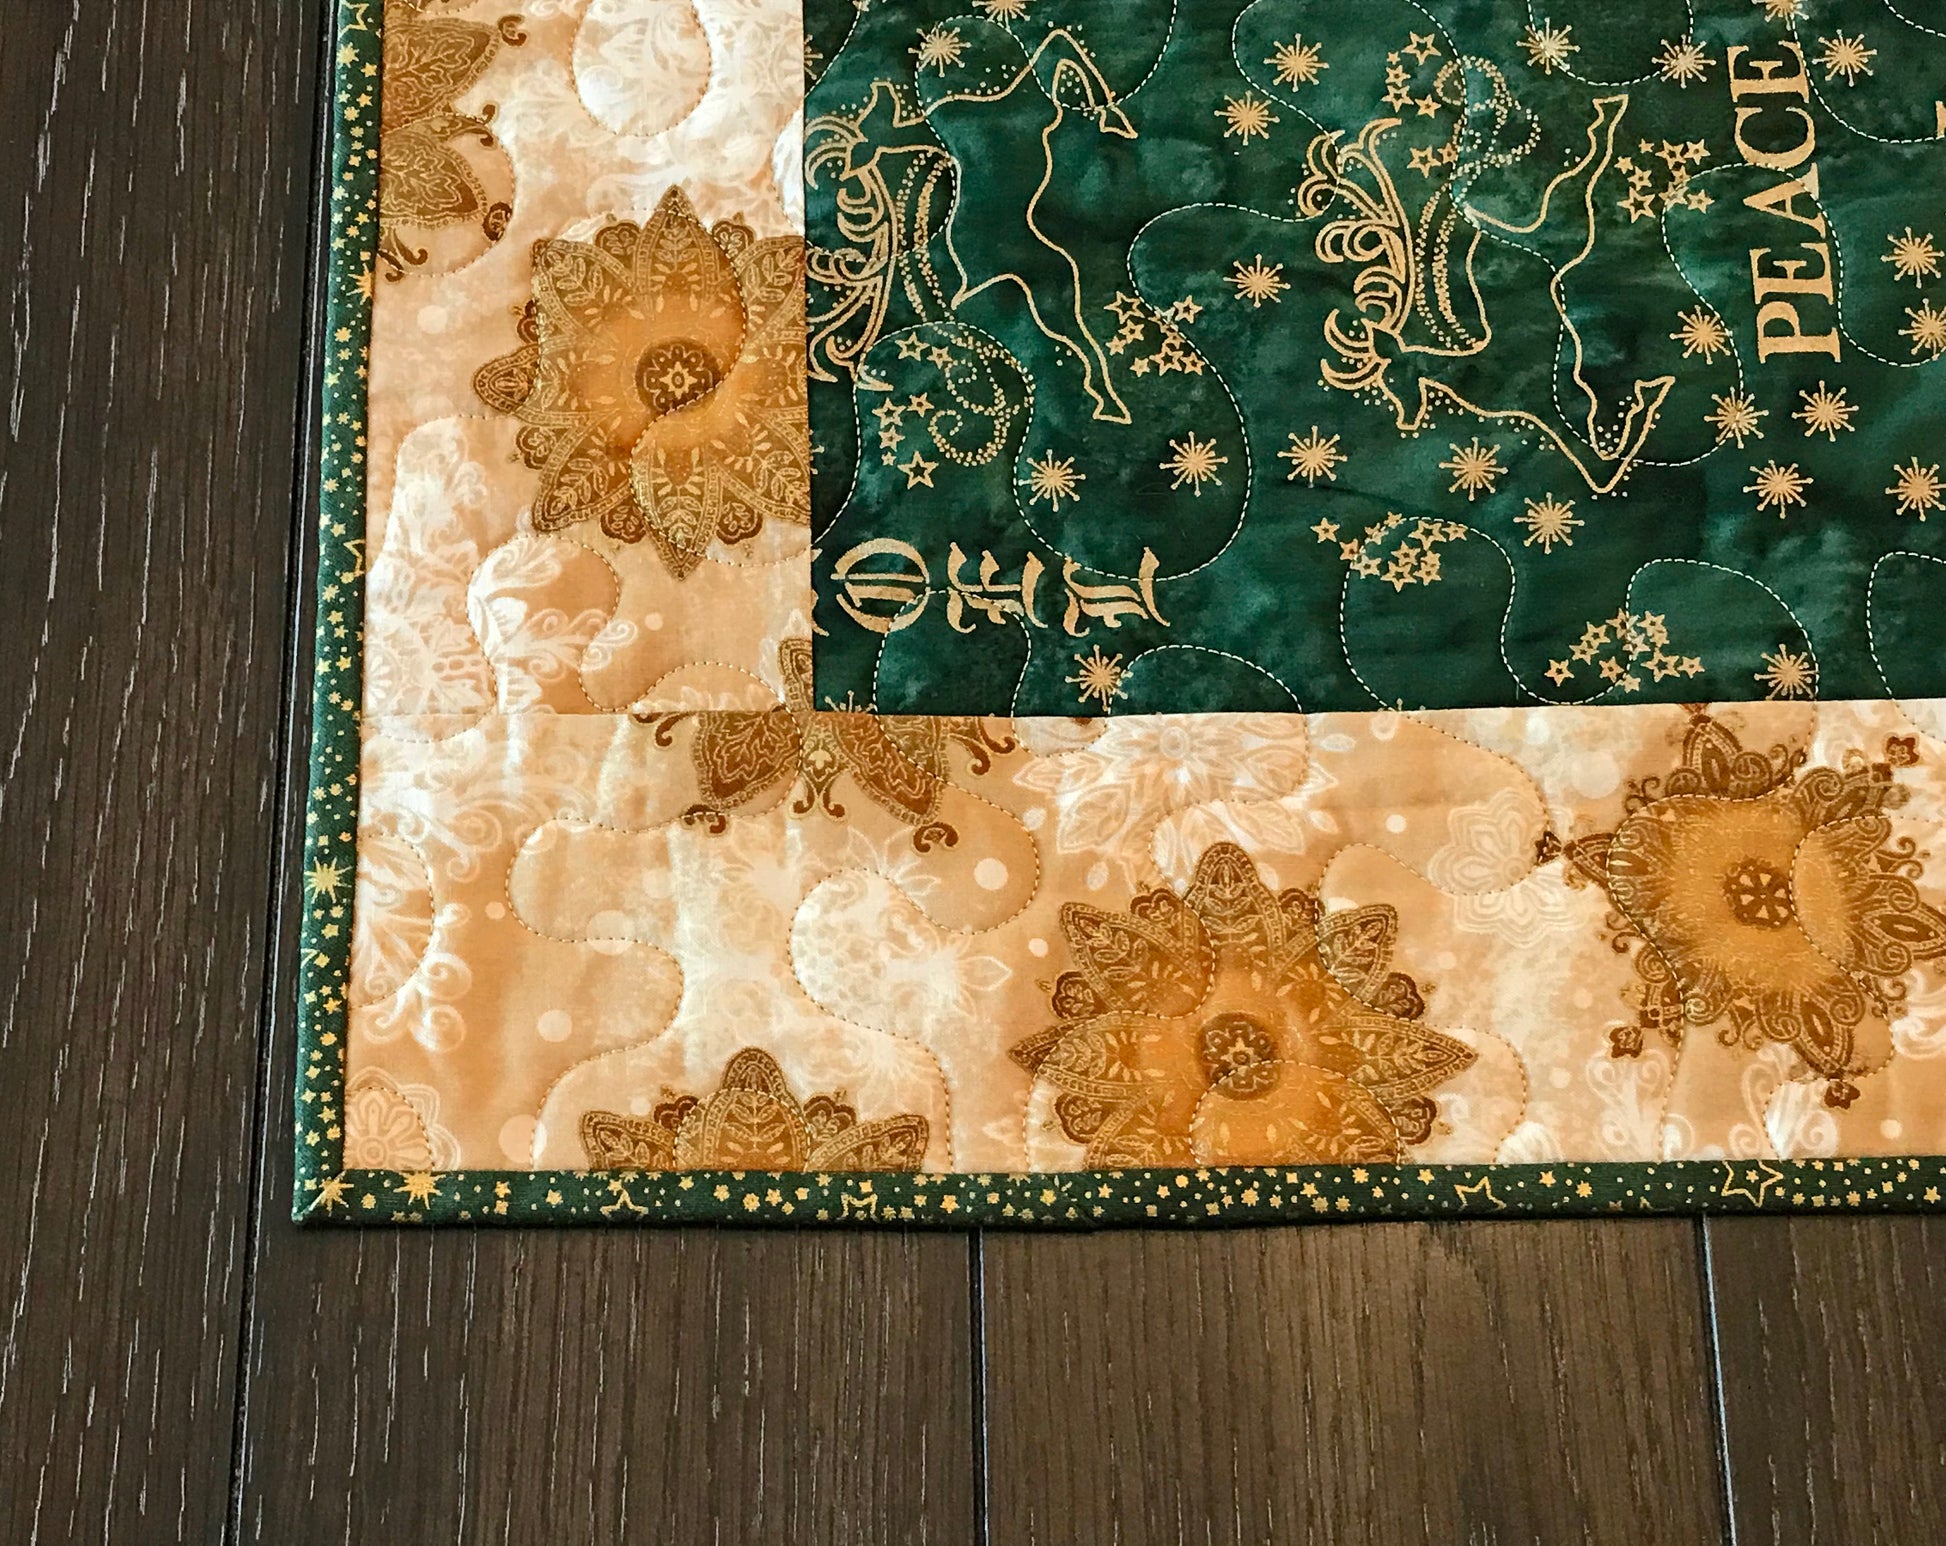 Green & Gold Batik Christmas Table Runner - Handmade Quilts, Digital Patterns, and Home Décor items online - Cuddle Cat Quiltworks